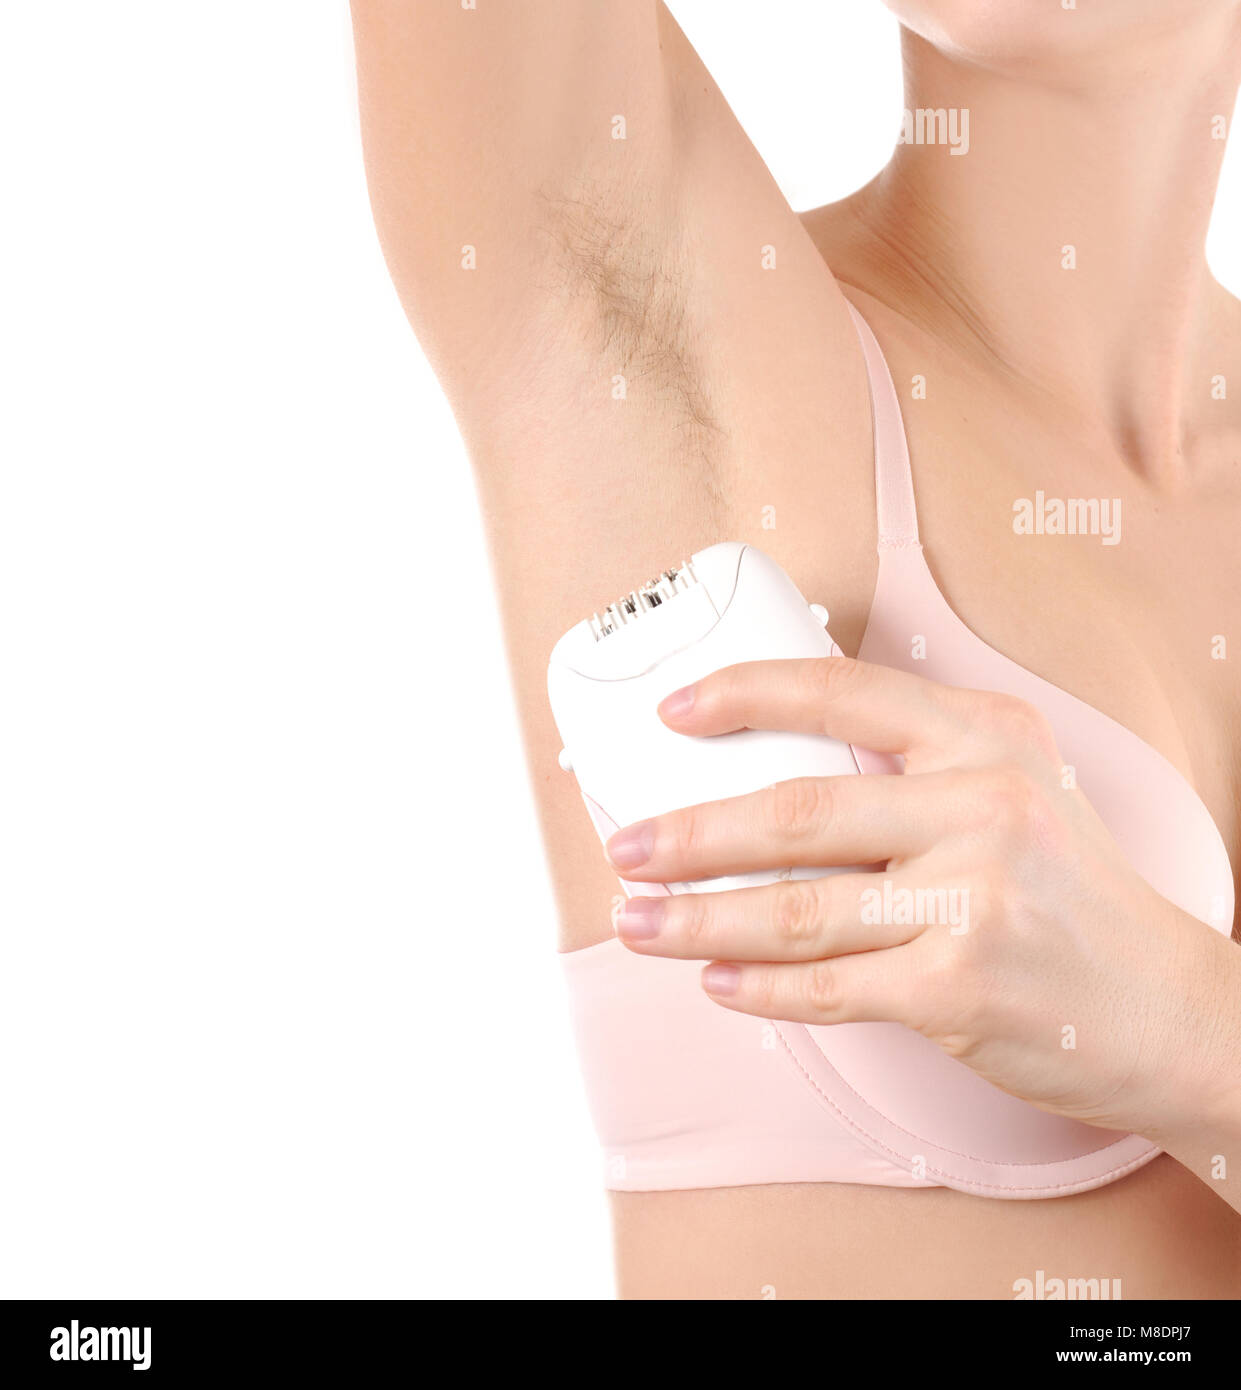 Woman with hairy armpits. Depilation, hair removal and skin care concept. Stock Photo